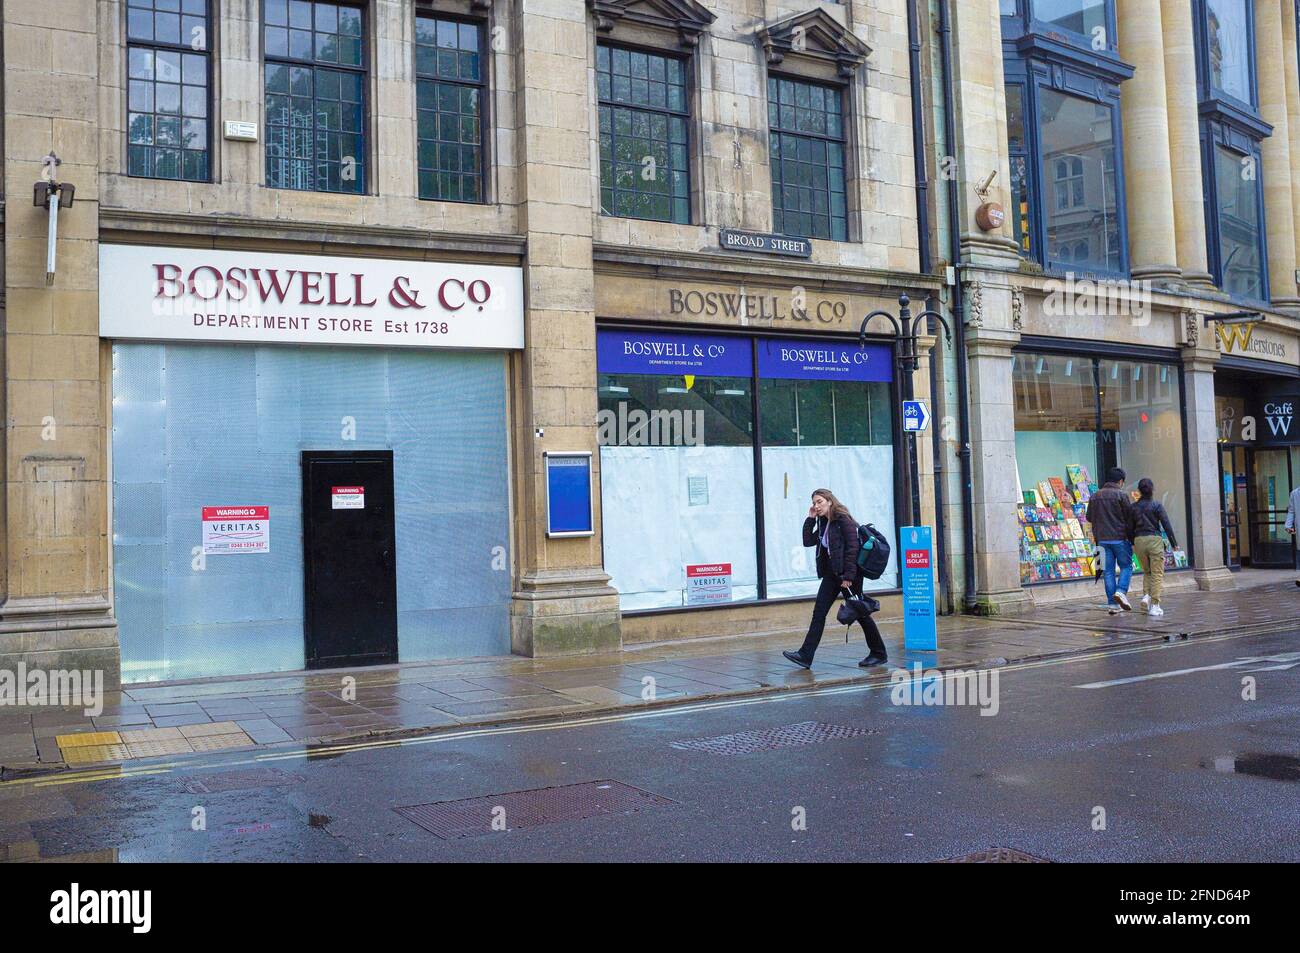 Trading since 1738, Boswells a well respected Oxford department store, has finally closed its doors - a victim of the coronavirus pandemic. Stock Photo